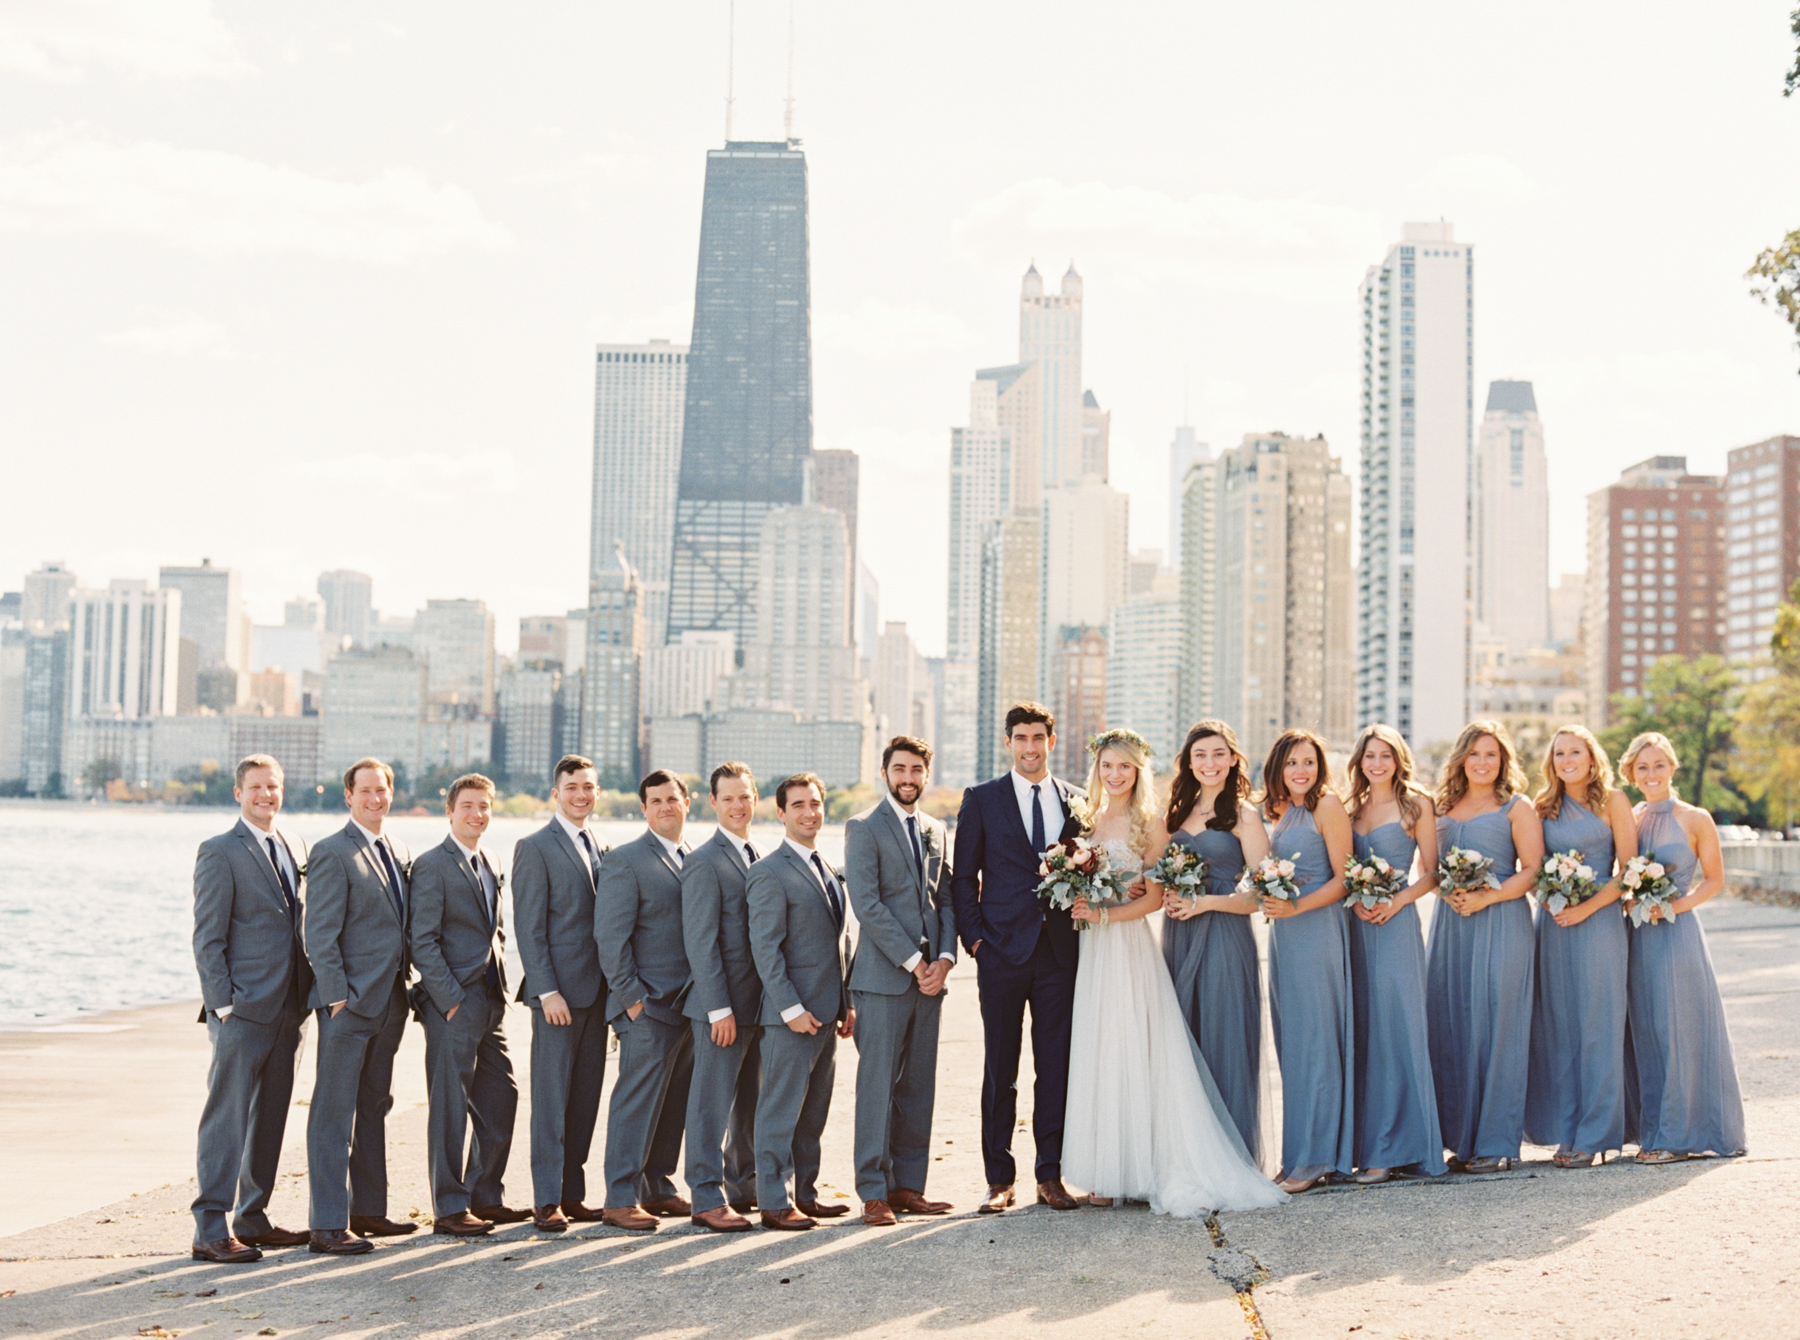 bride, groom and bridal party pose in front of Chicago skyline photo bry Chicago Wedding Photographer Kati Rosado